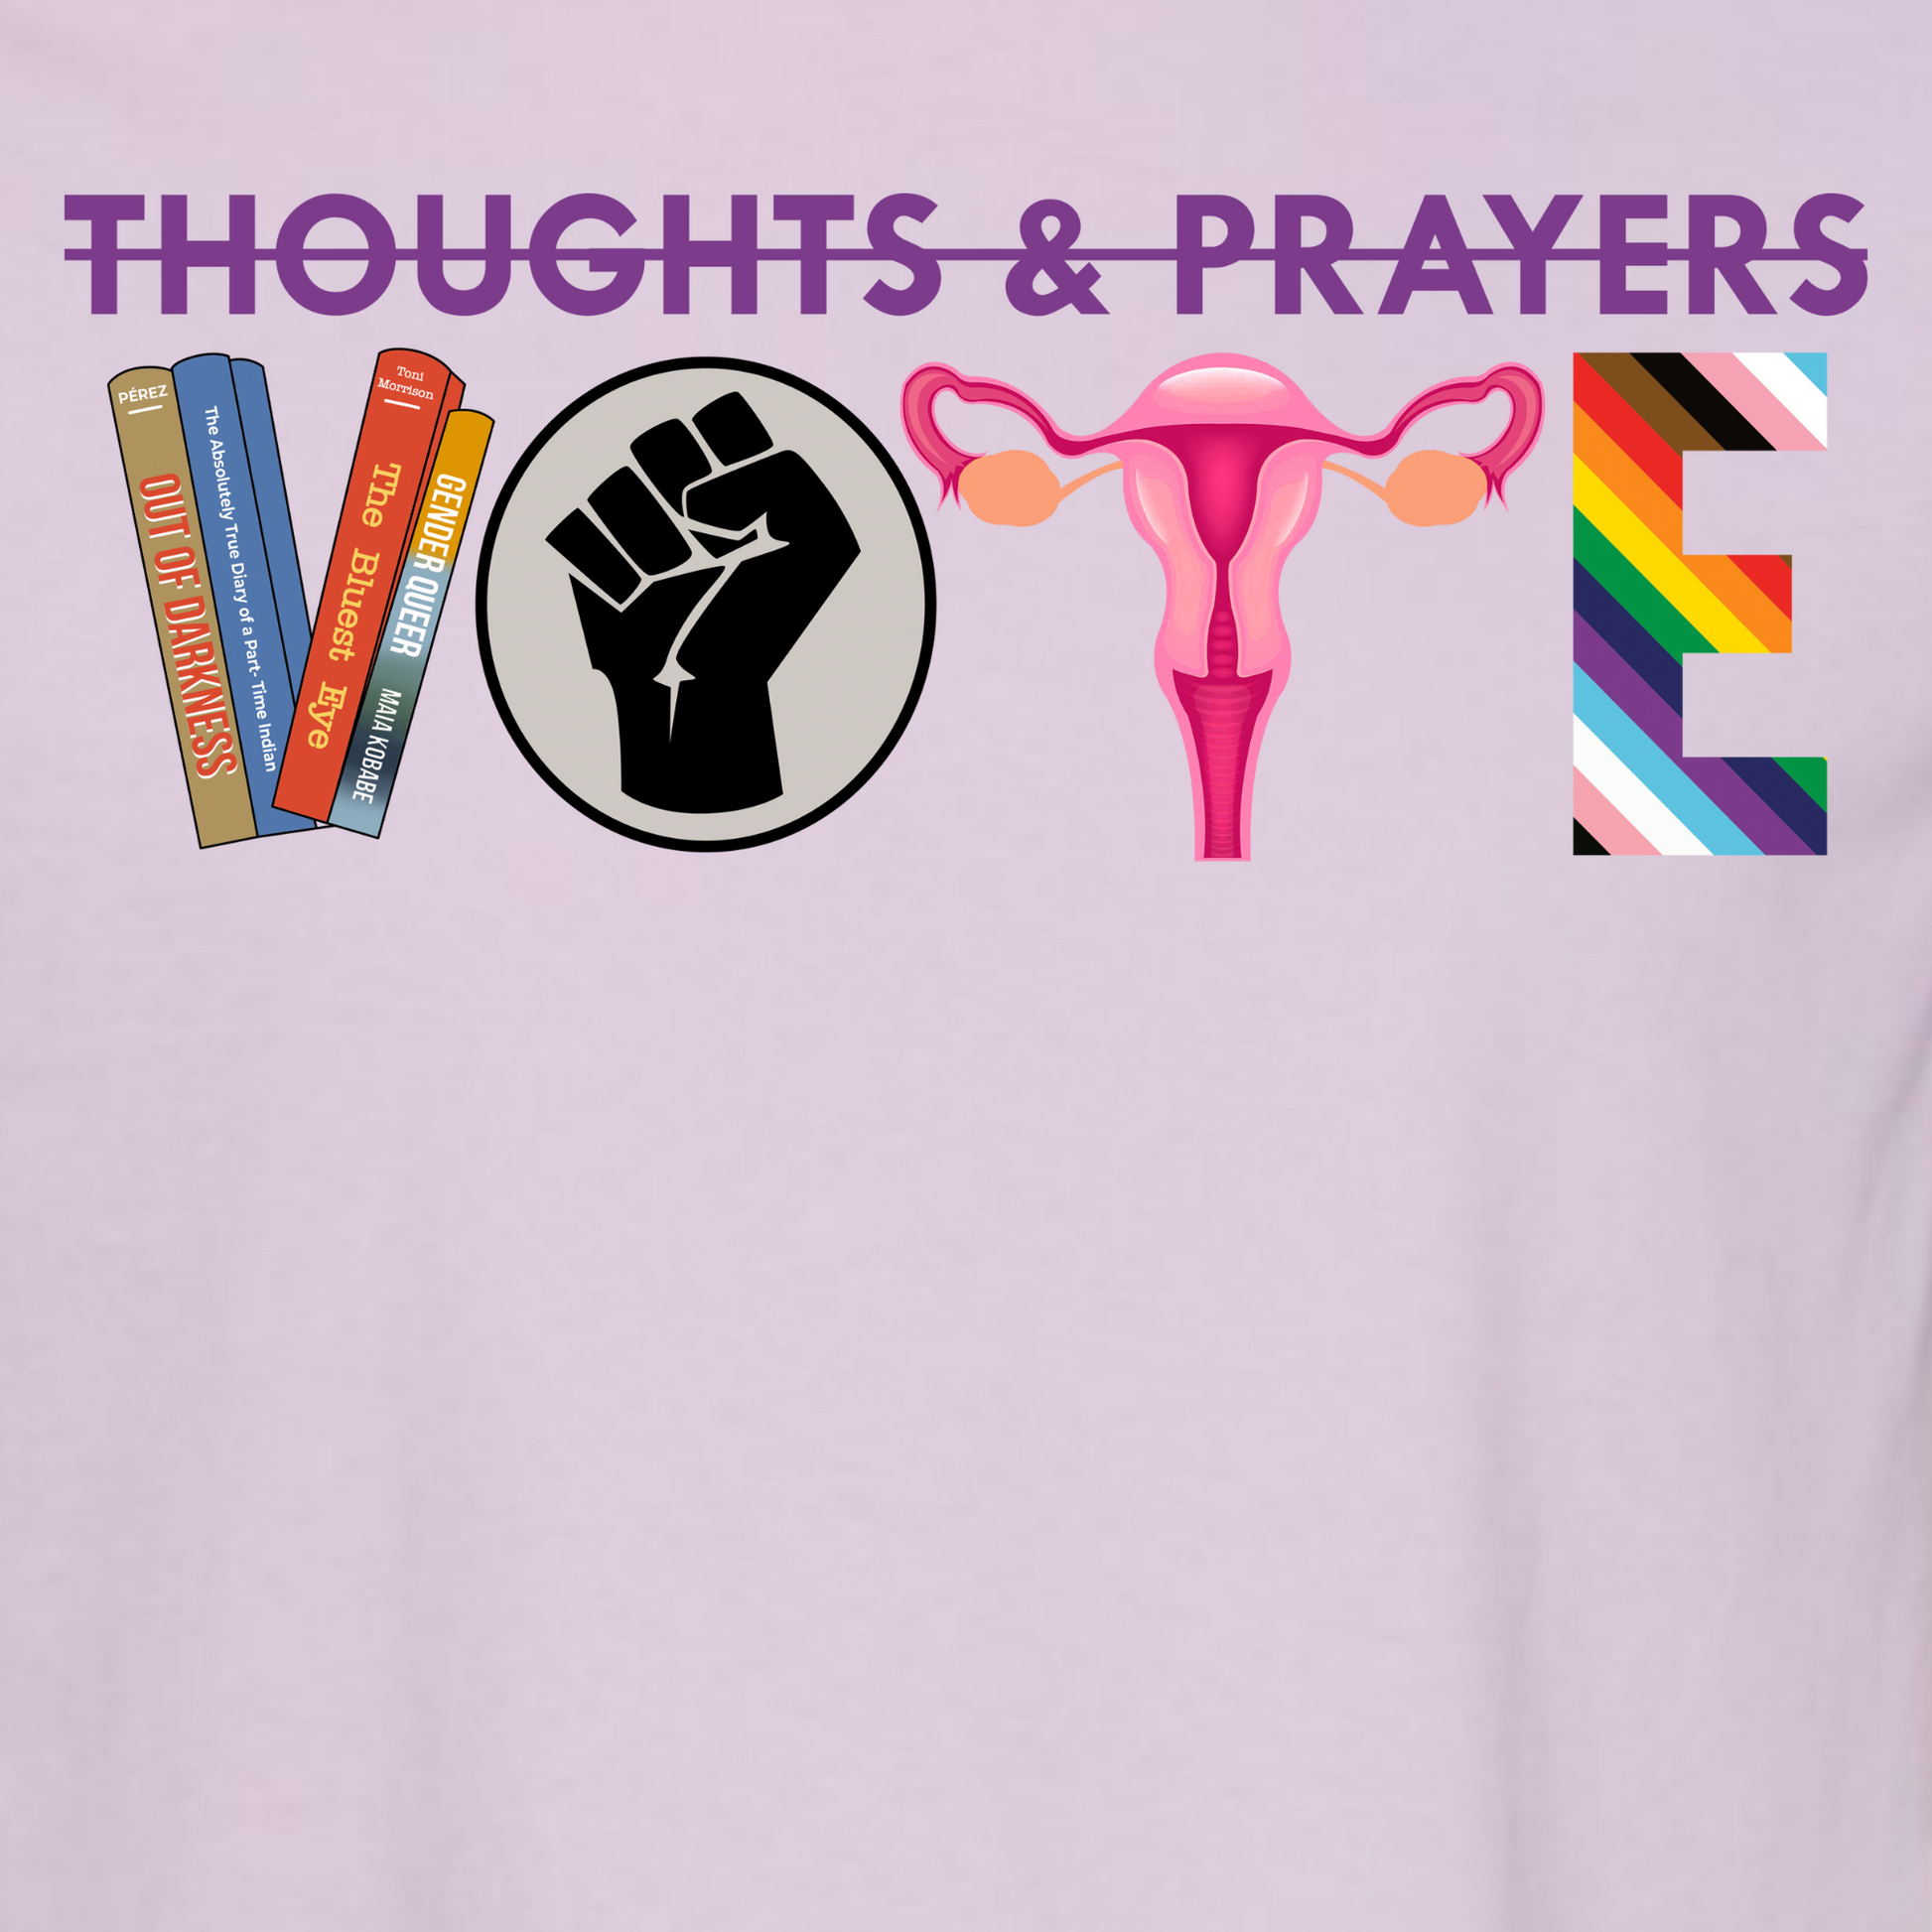 The image shows a closeup of an Orchid (a light purple) Shirt and features a graphic that is rectangular. At the top in dark purple letters are the words Thoughts and Prayers with a line struck through them. Below is the word VOTE. The V is formed by four banned books, the O is a black circle with a black raised fist on a gray background representing black lives matter. The T is uterus with fallopian tubes and ovaries in pink. The E is Rainbow striped to represent the LGBTQIA+ community. 